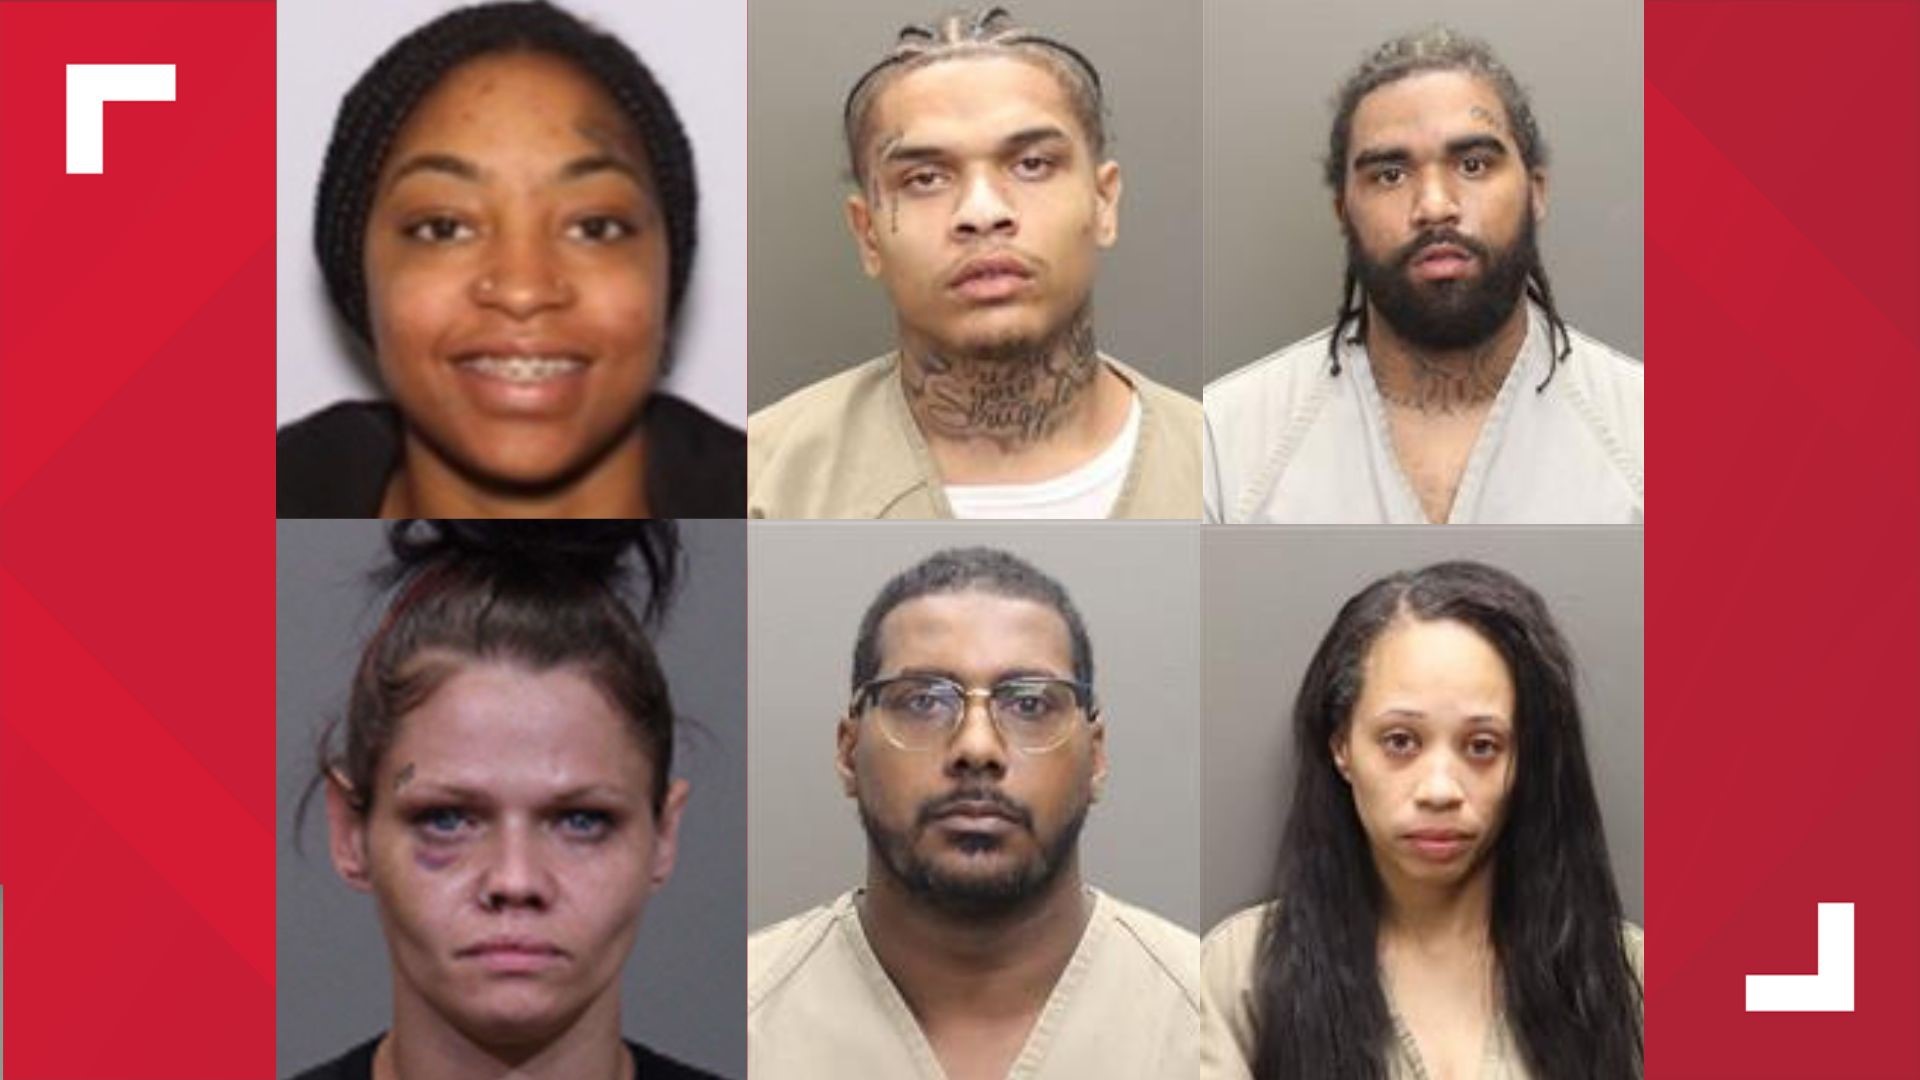 The indictments follow an investigation by the Central Ohio Human Trafficking Task Force.